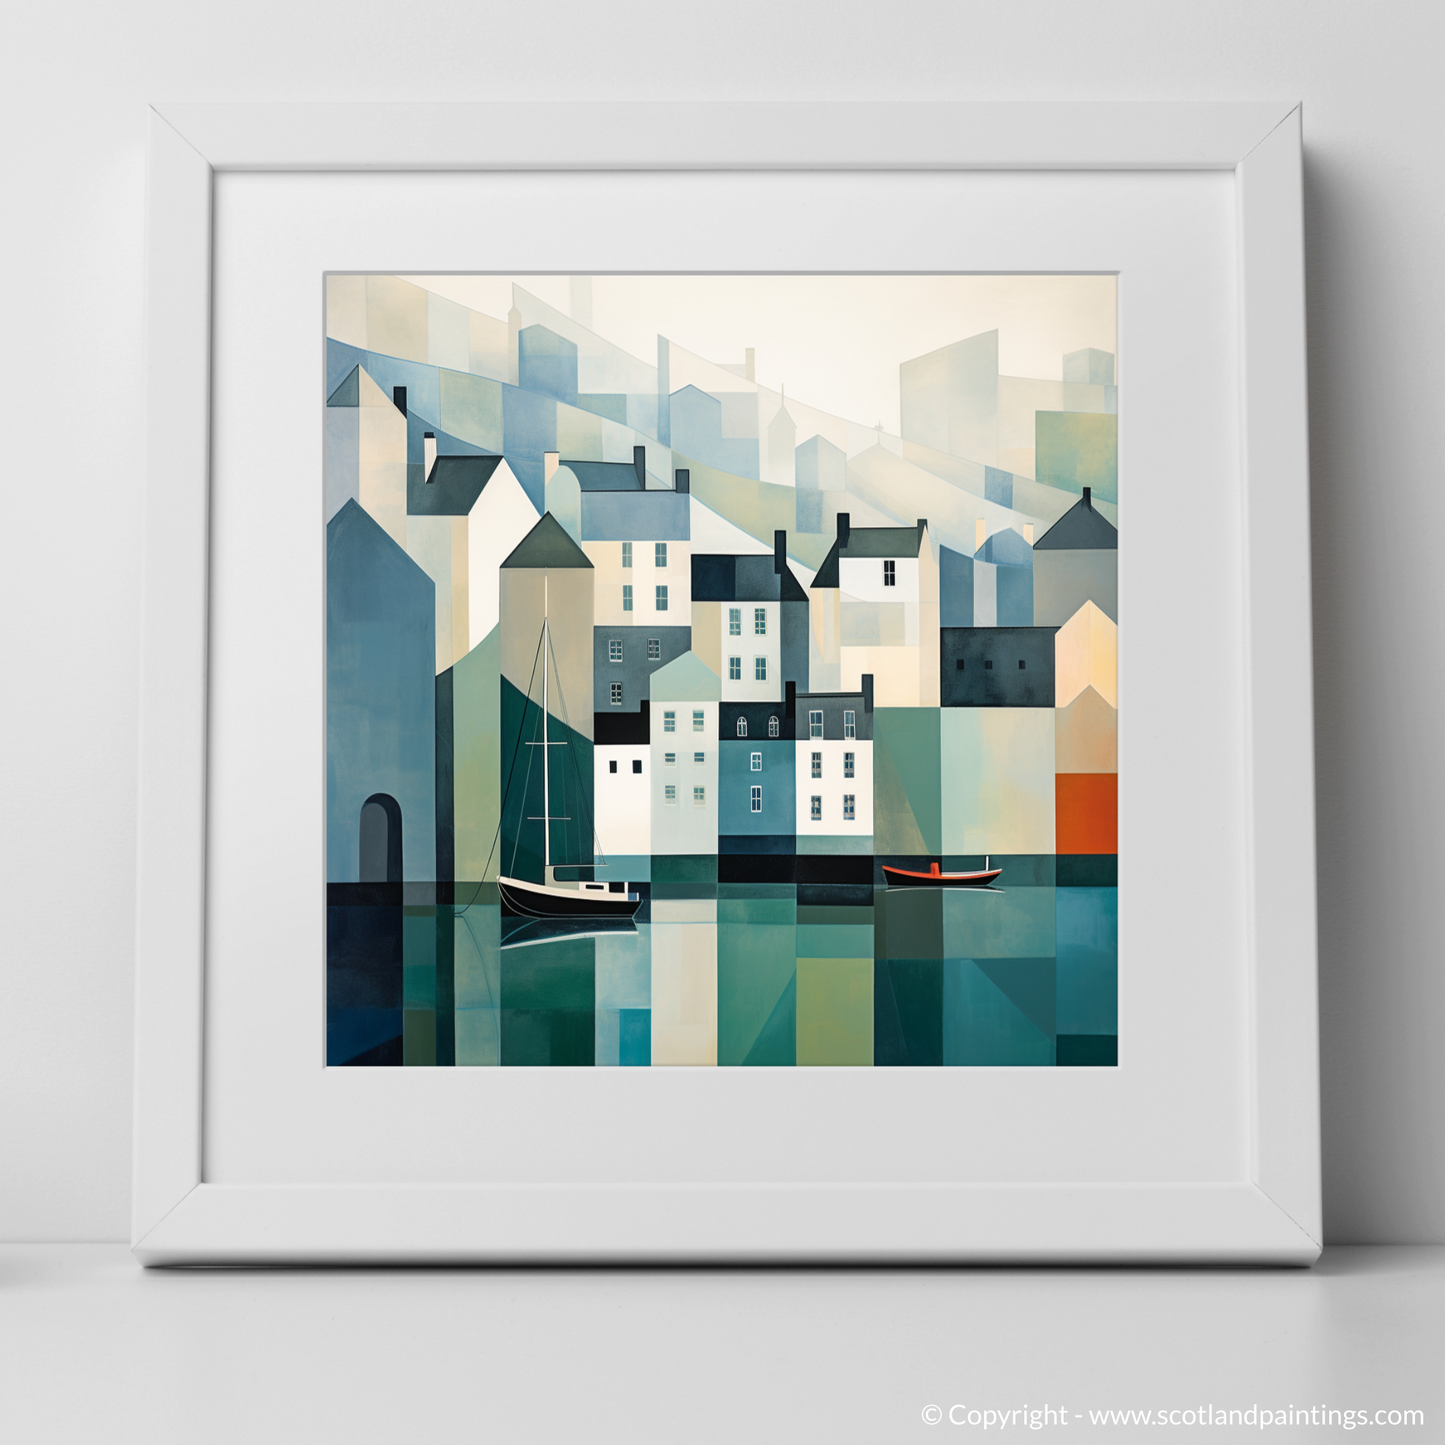 Serenity of Portree Harbour: A Minimalist Masterpiece